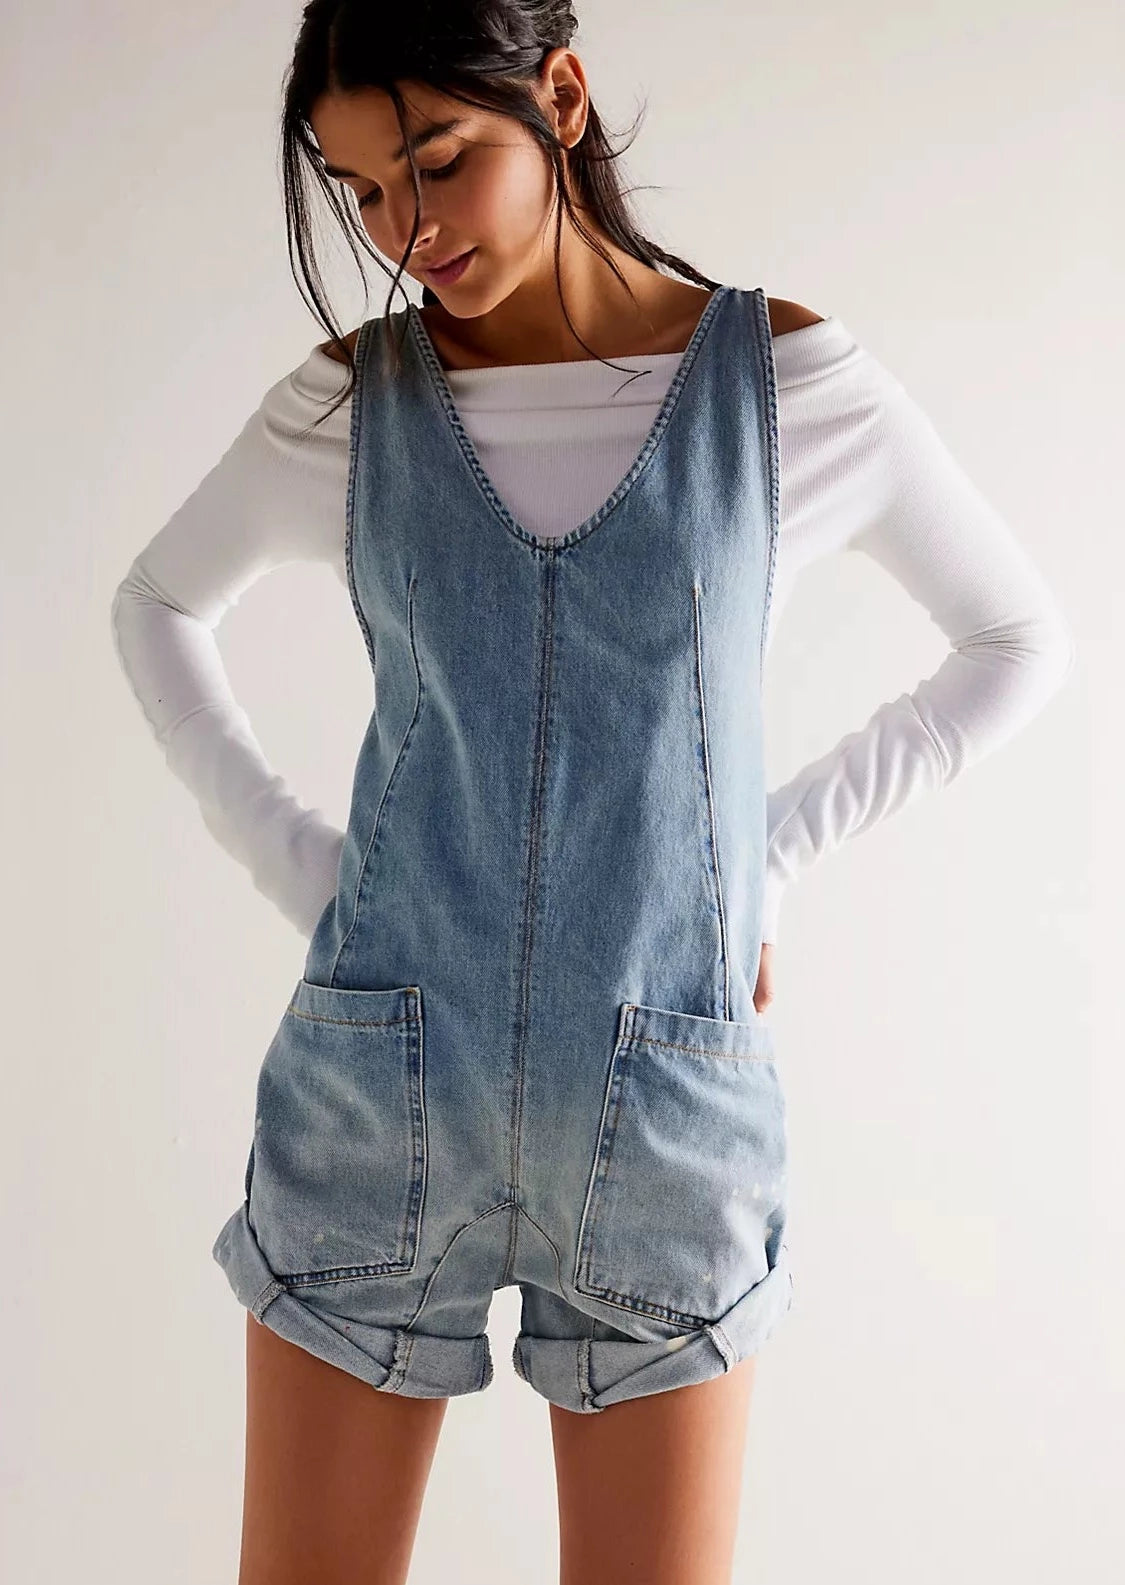 light/medium wash denim romper with cuffed shorts and front pockets